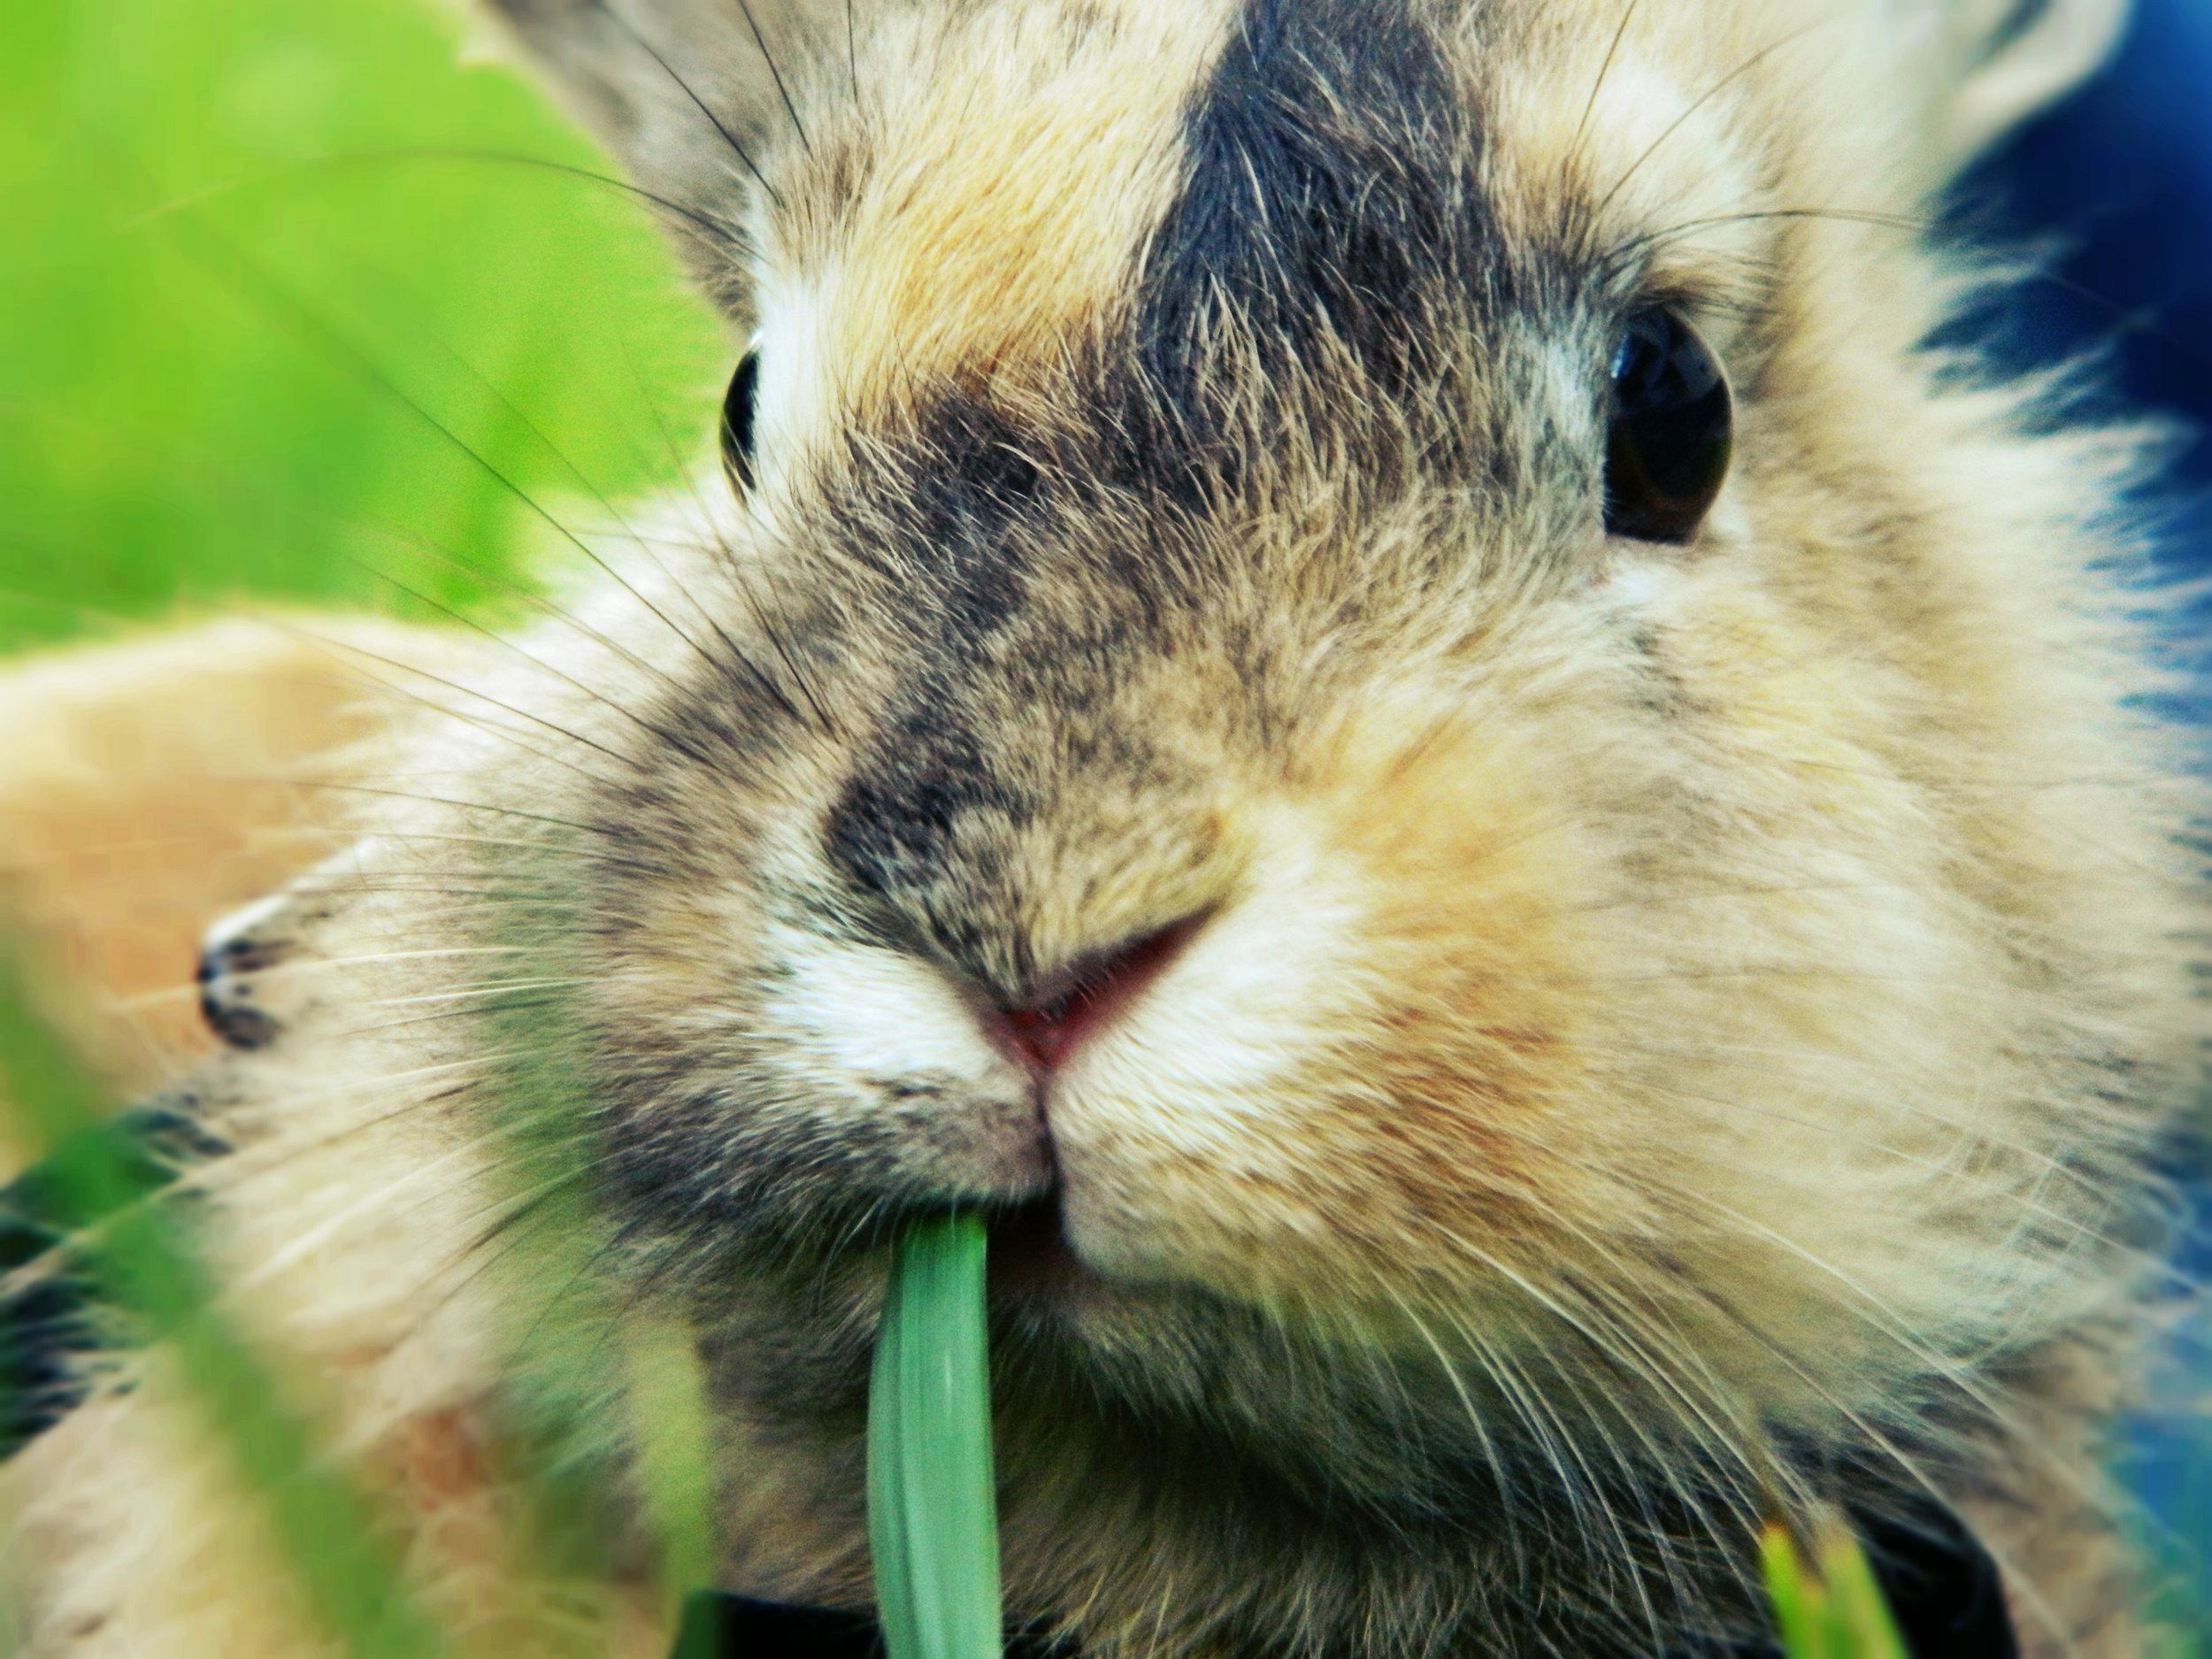 Bunny Nibbles on a Blade of Grass